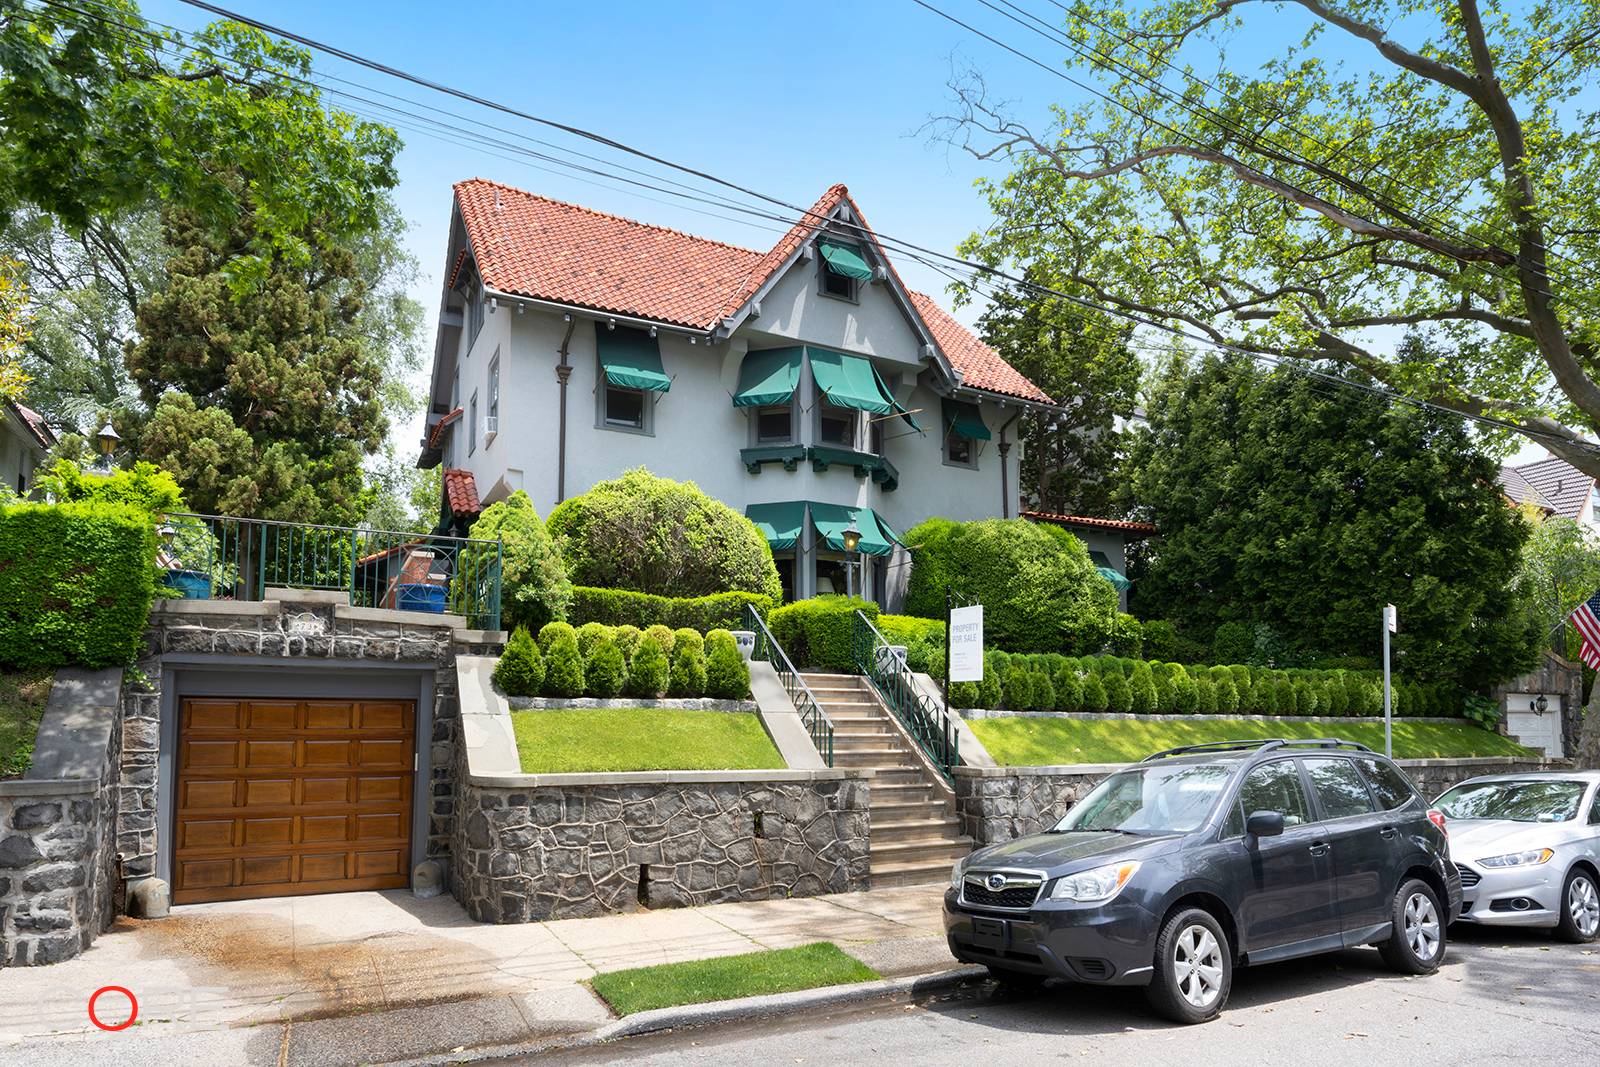 This magnificent manor house was built in 1910 in the exclusive Crescent Hill section of Bay Ridge.